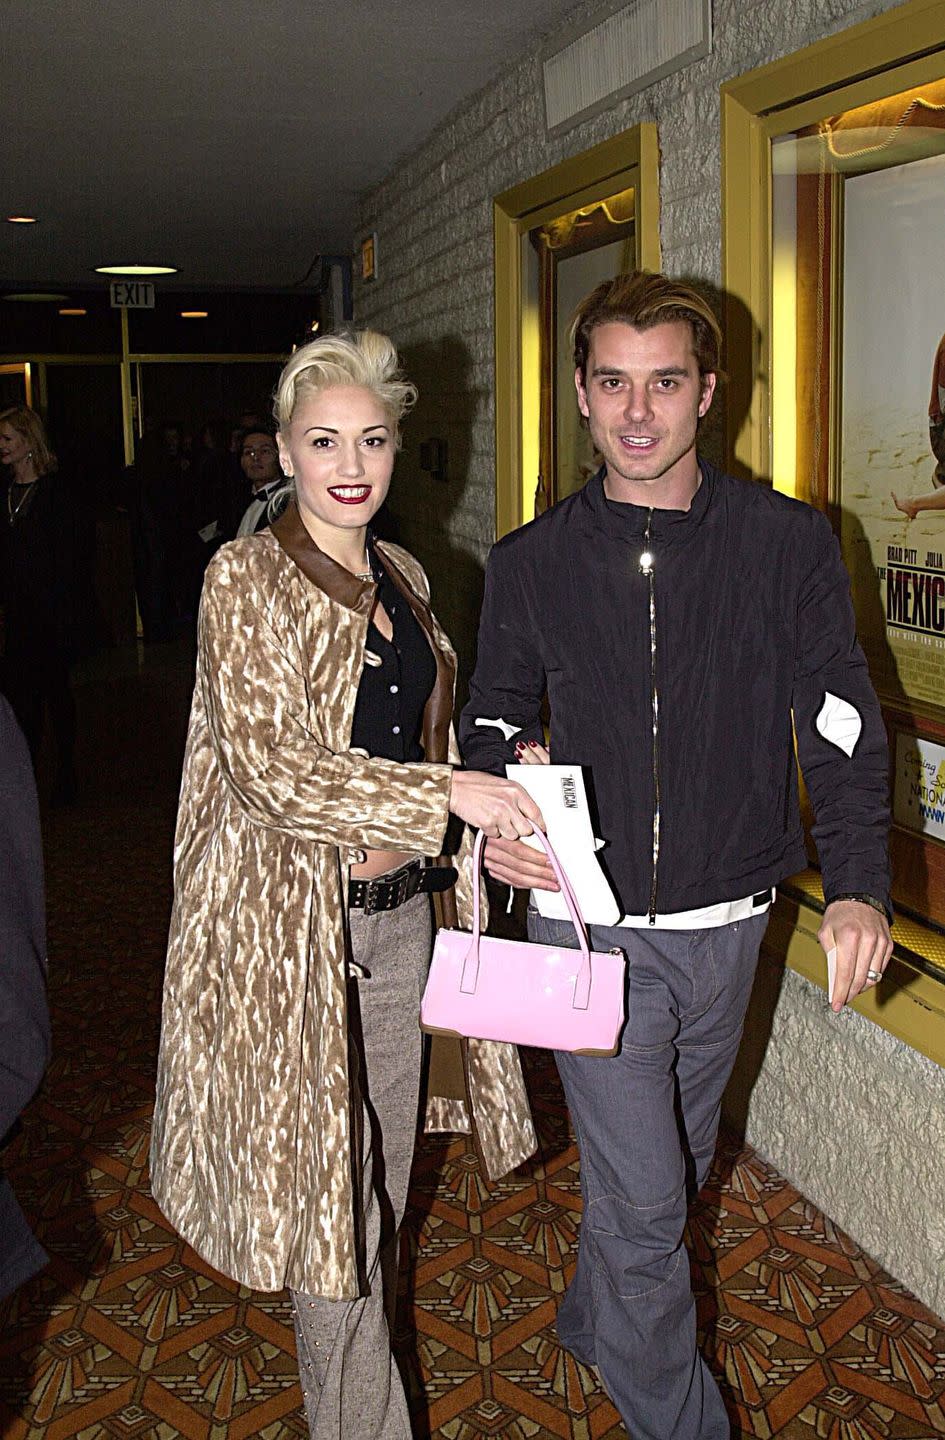 gwen stefani and gavin rossdale walk together next to a wall with movie posters on it, she wears a brown patterned coat and holds a pink purse, he wears a black jacket